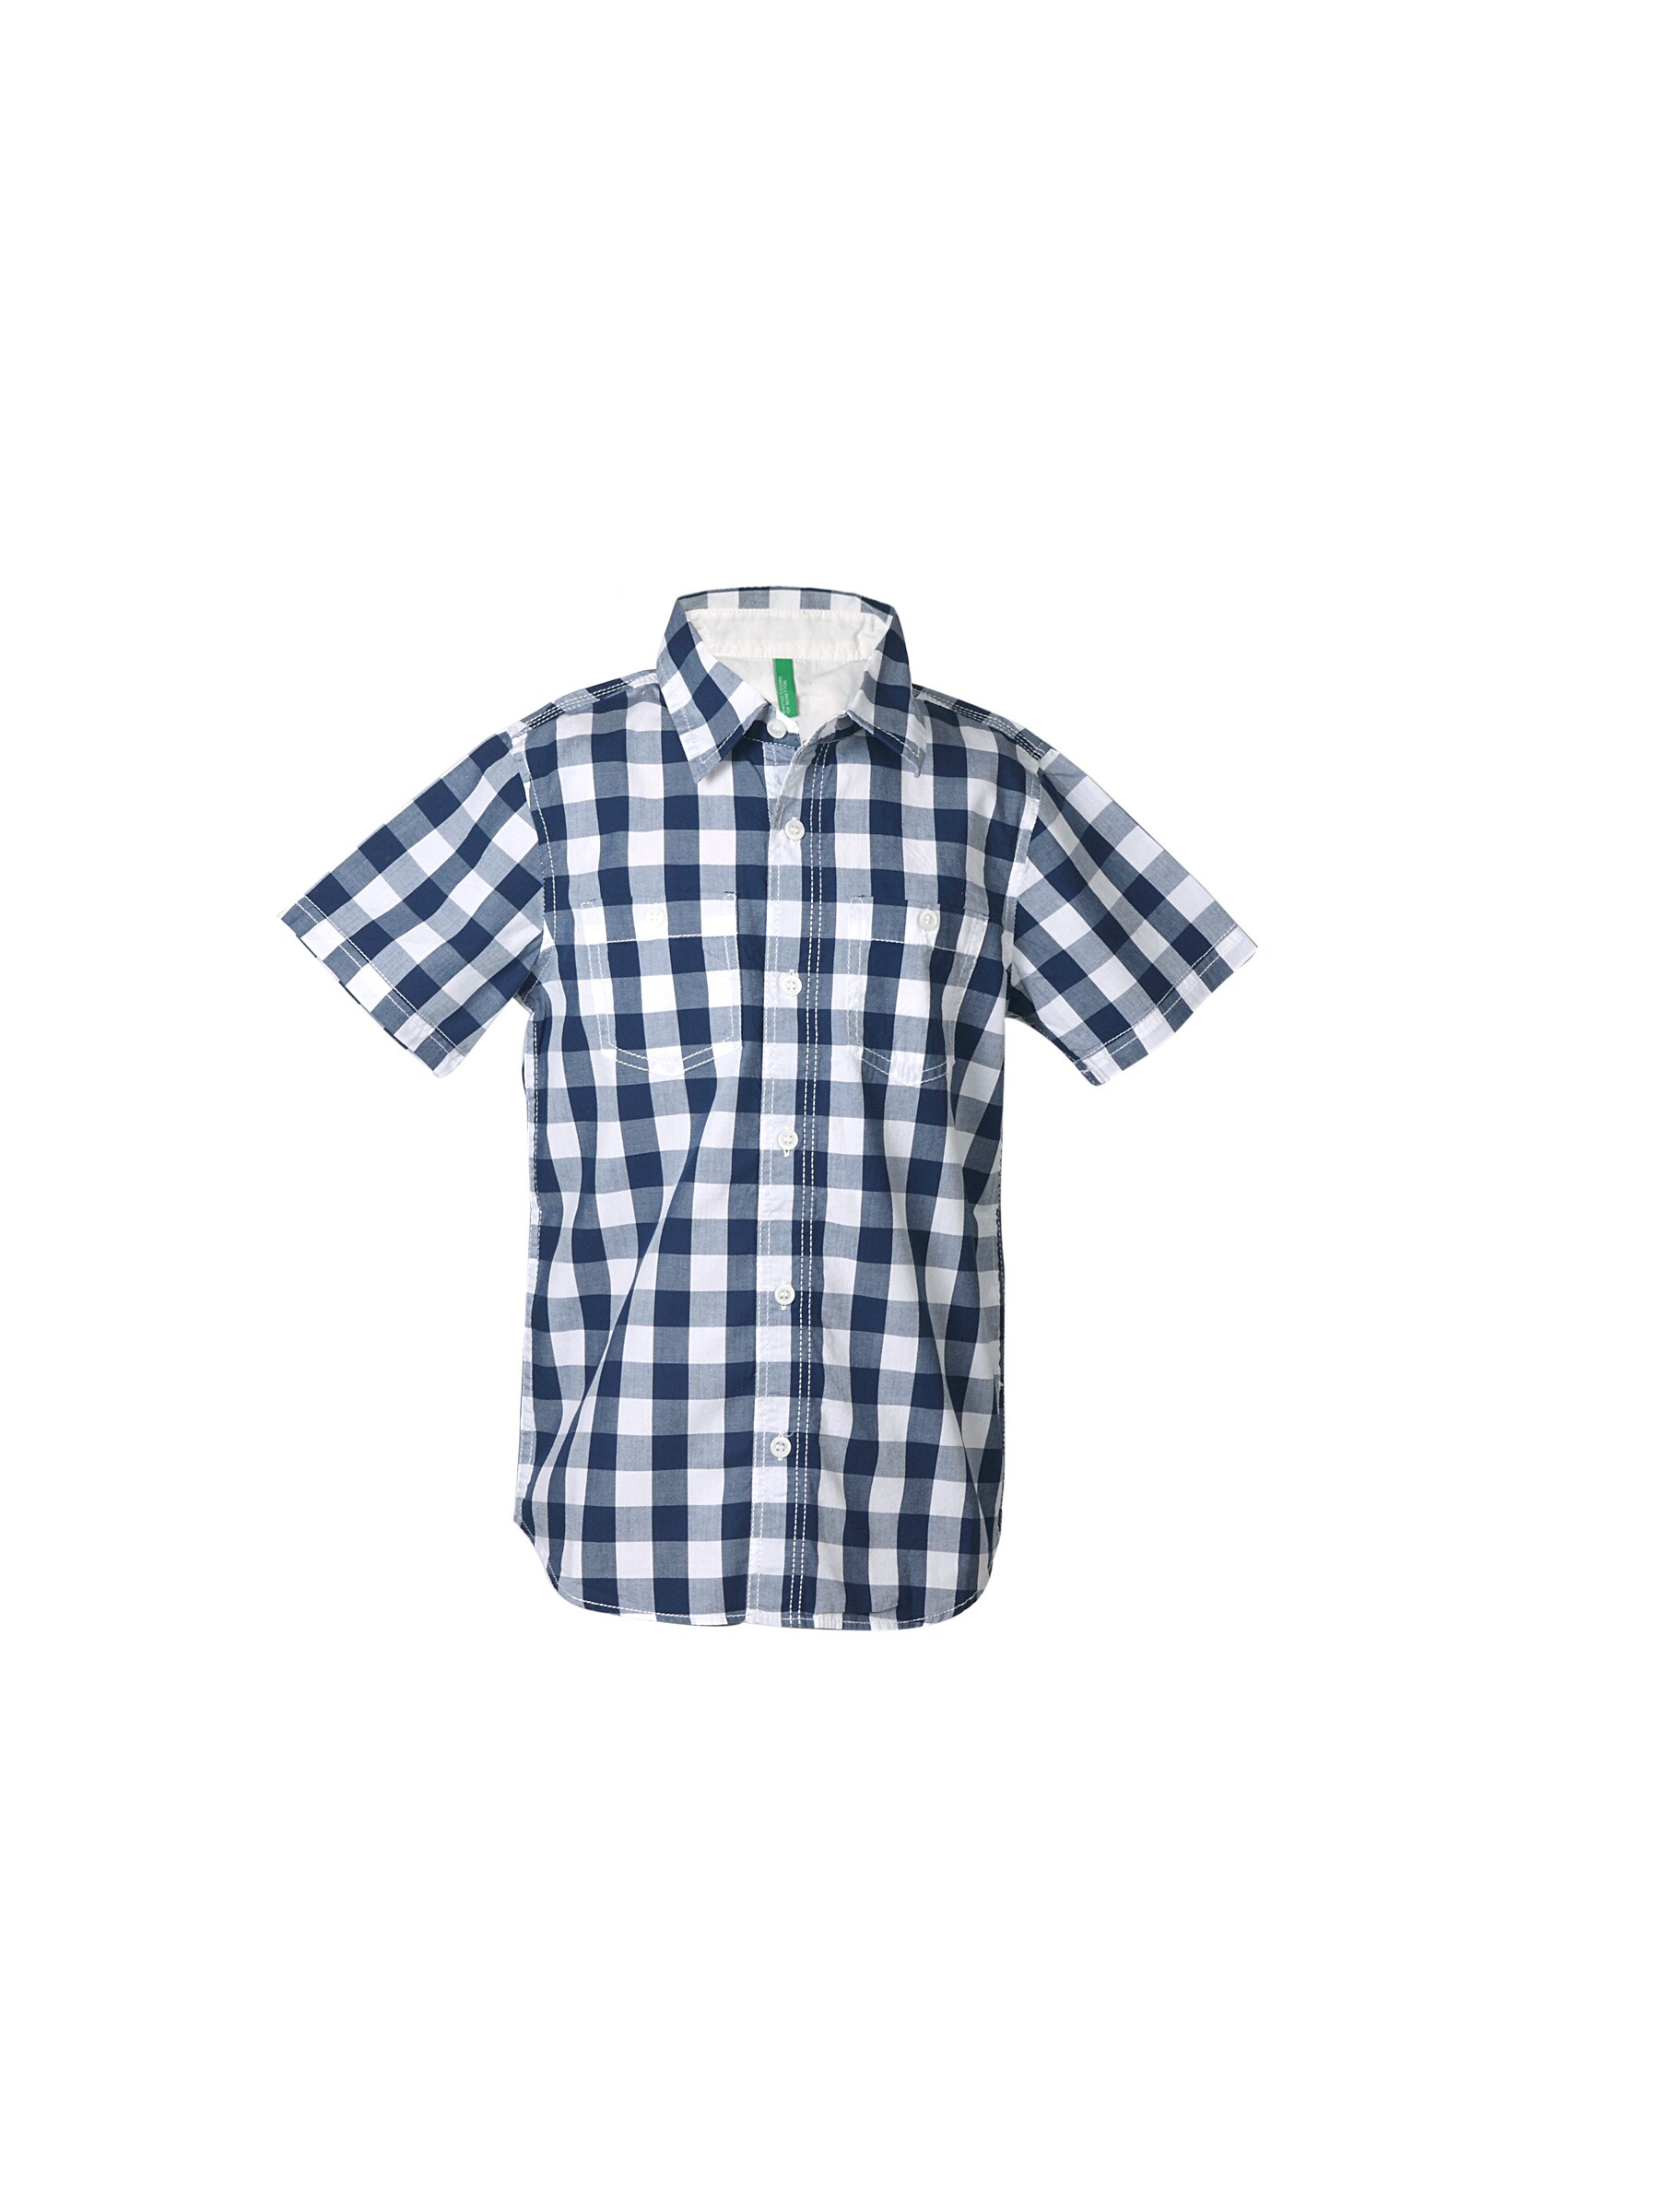 United Colors of Benetton Boys Check Navy Blue Shirt